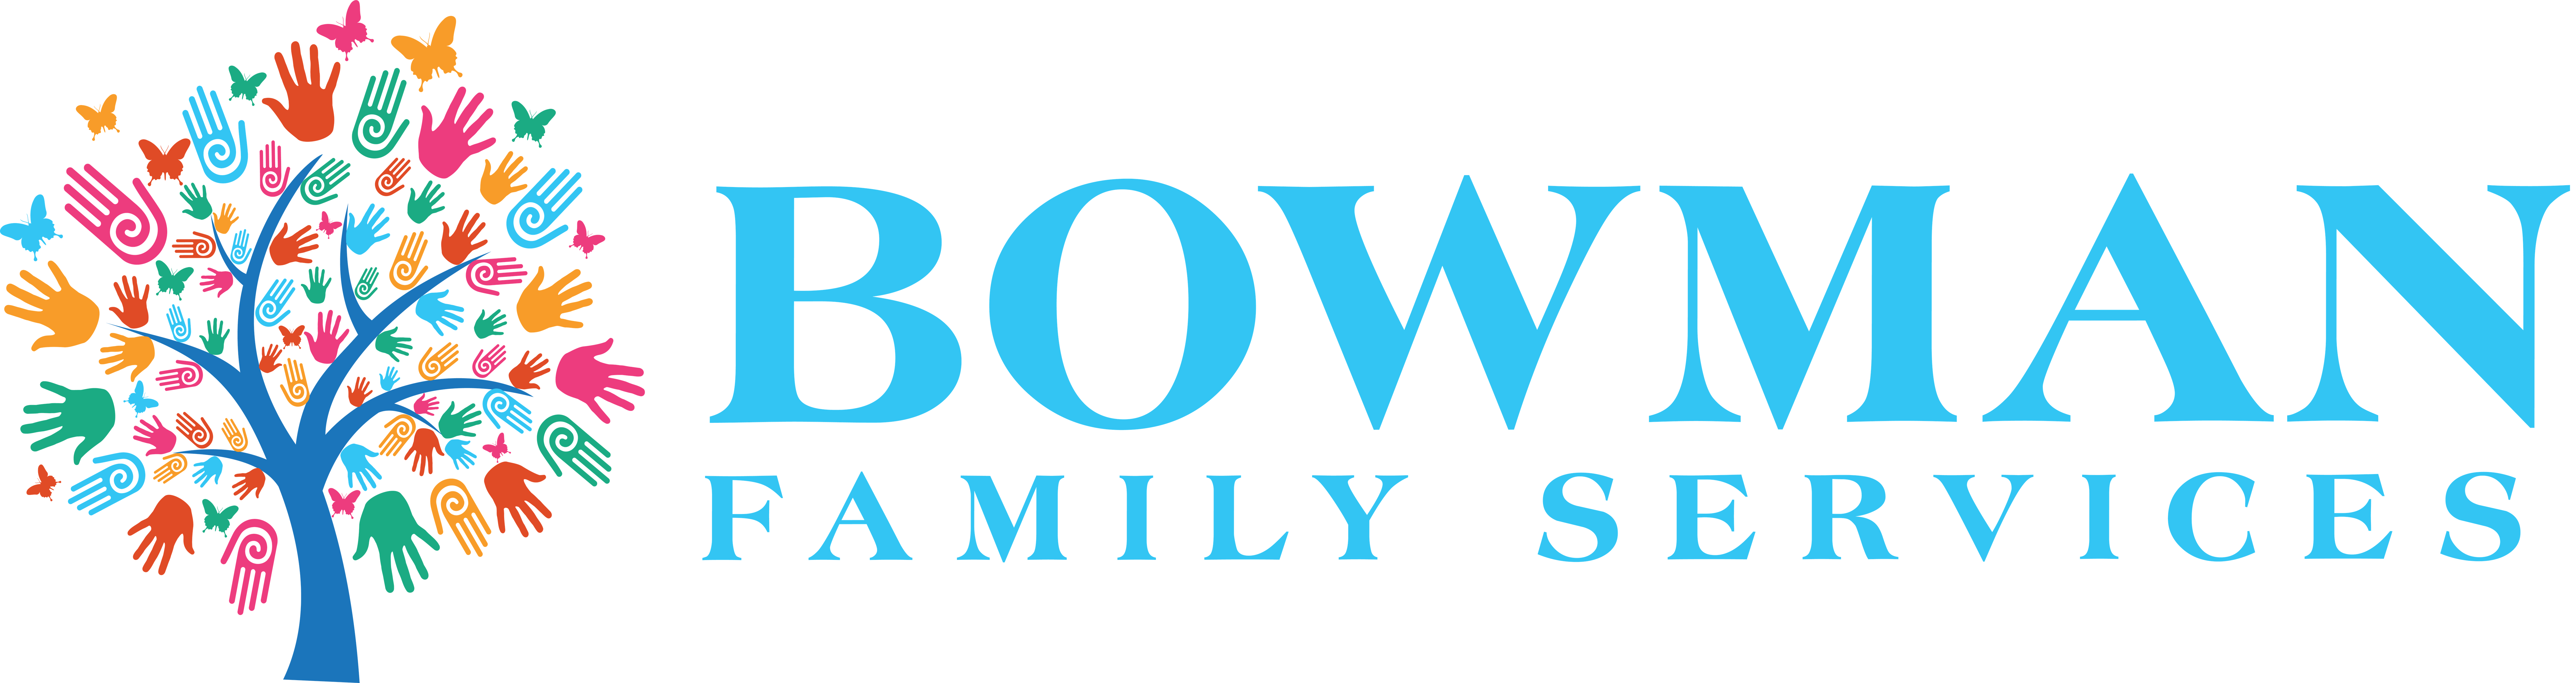 Wake Forest Counselors - Bowman Family Services